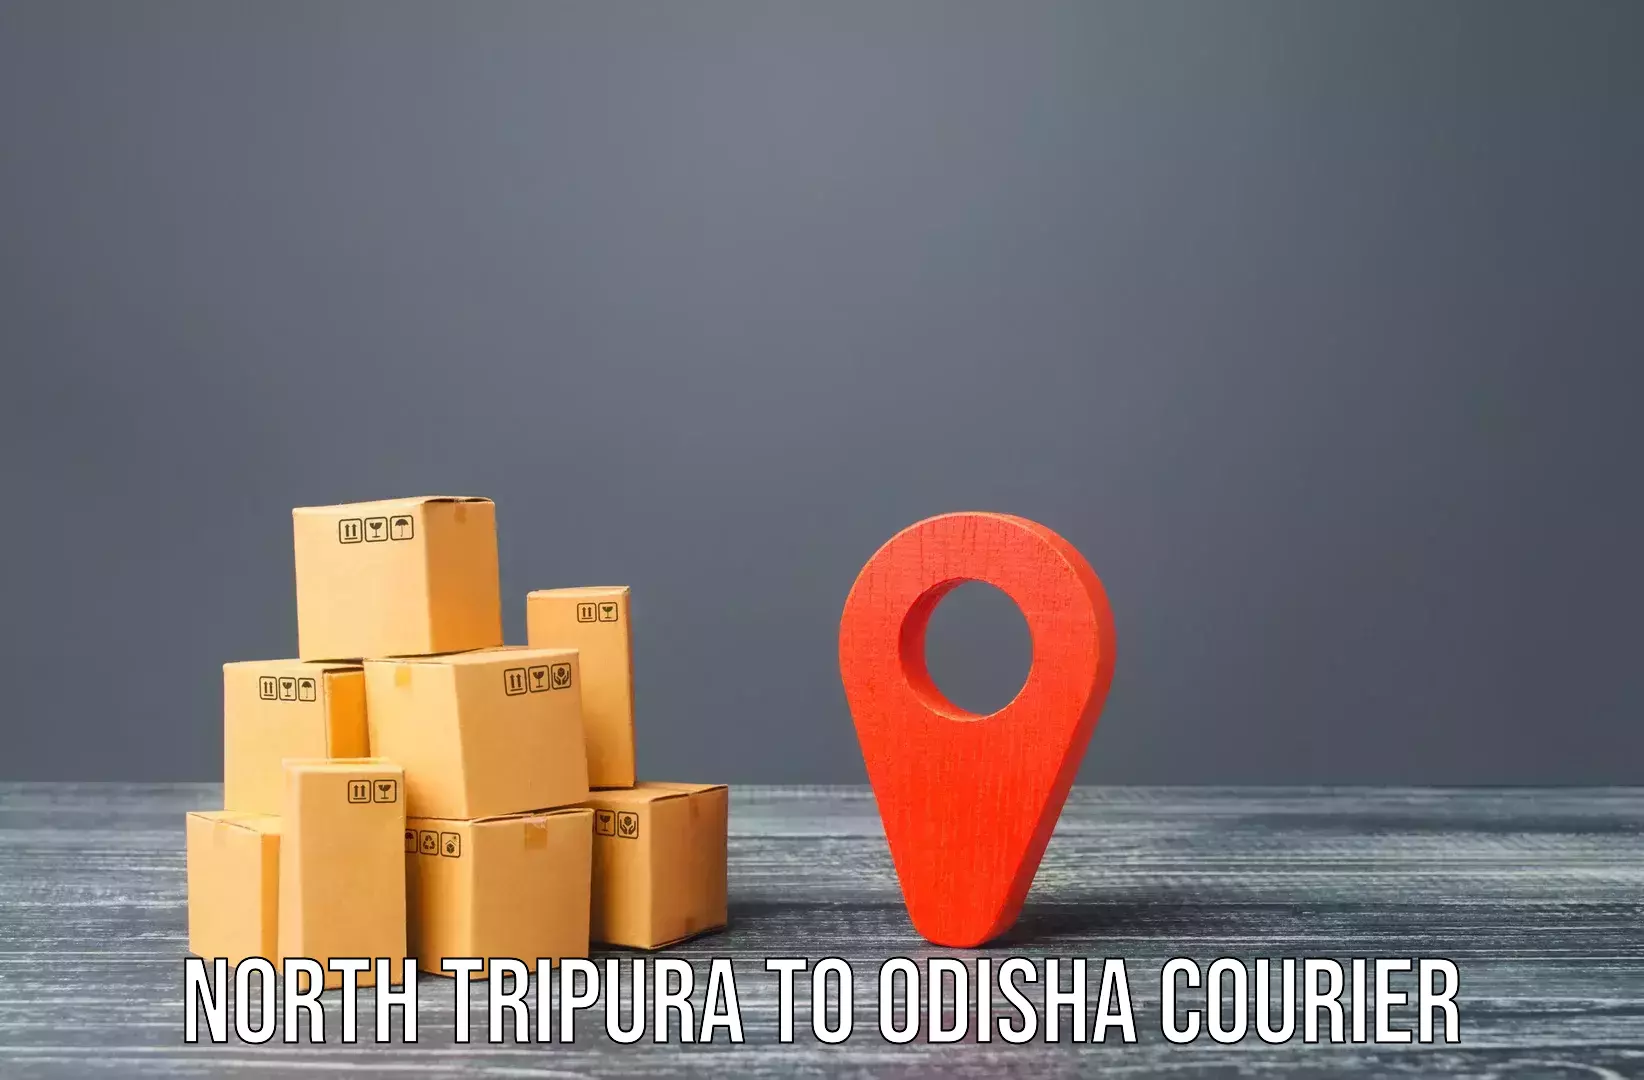 Home moving specialists North Tripura to Sukinda